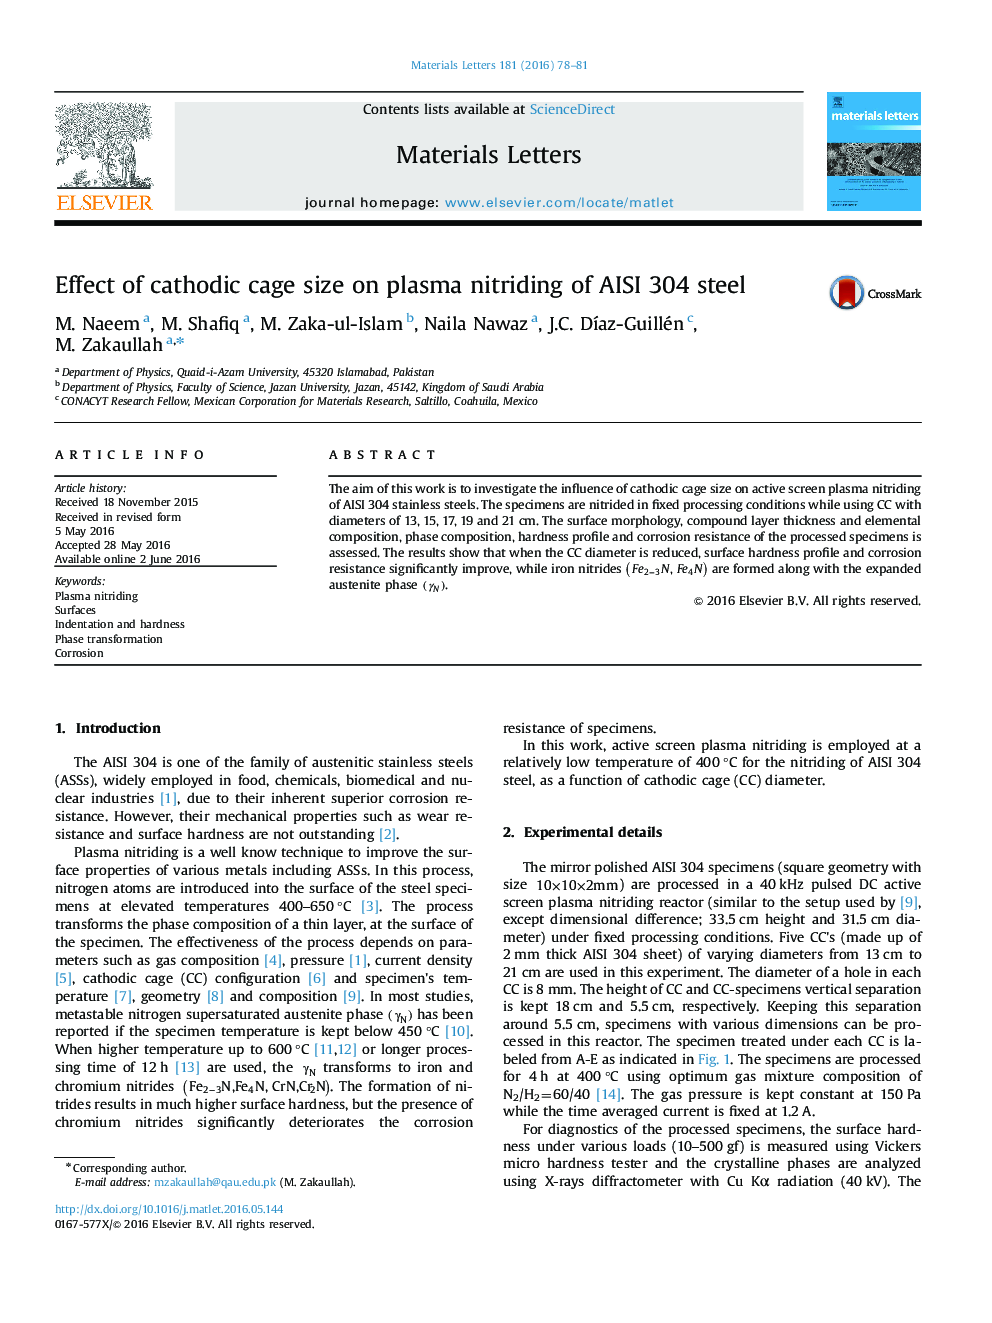 Effect of cathodic cage size on plasma nitriding of AISI 304 steel